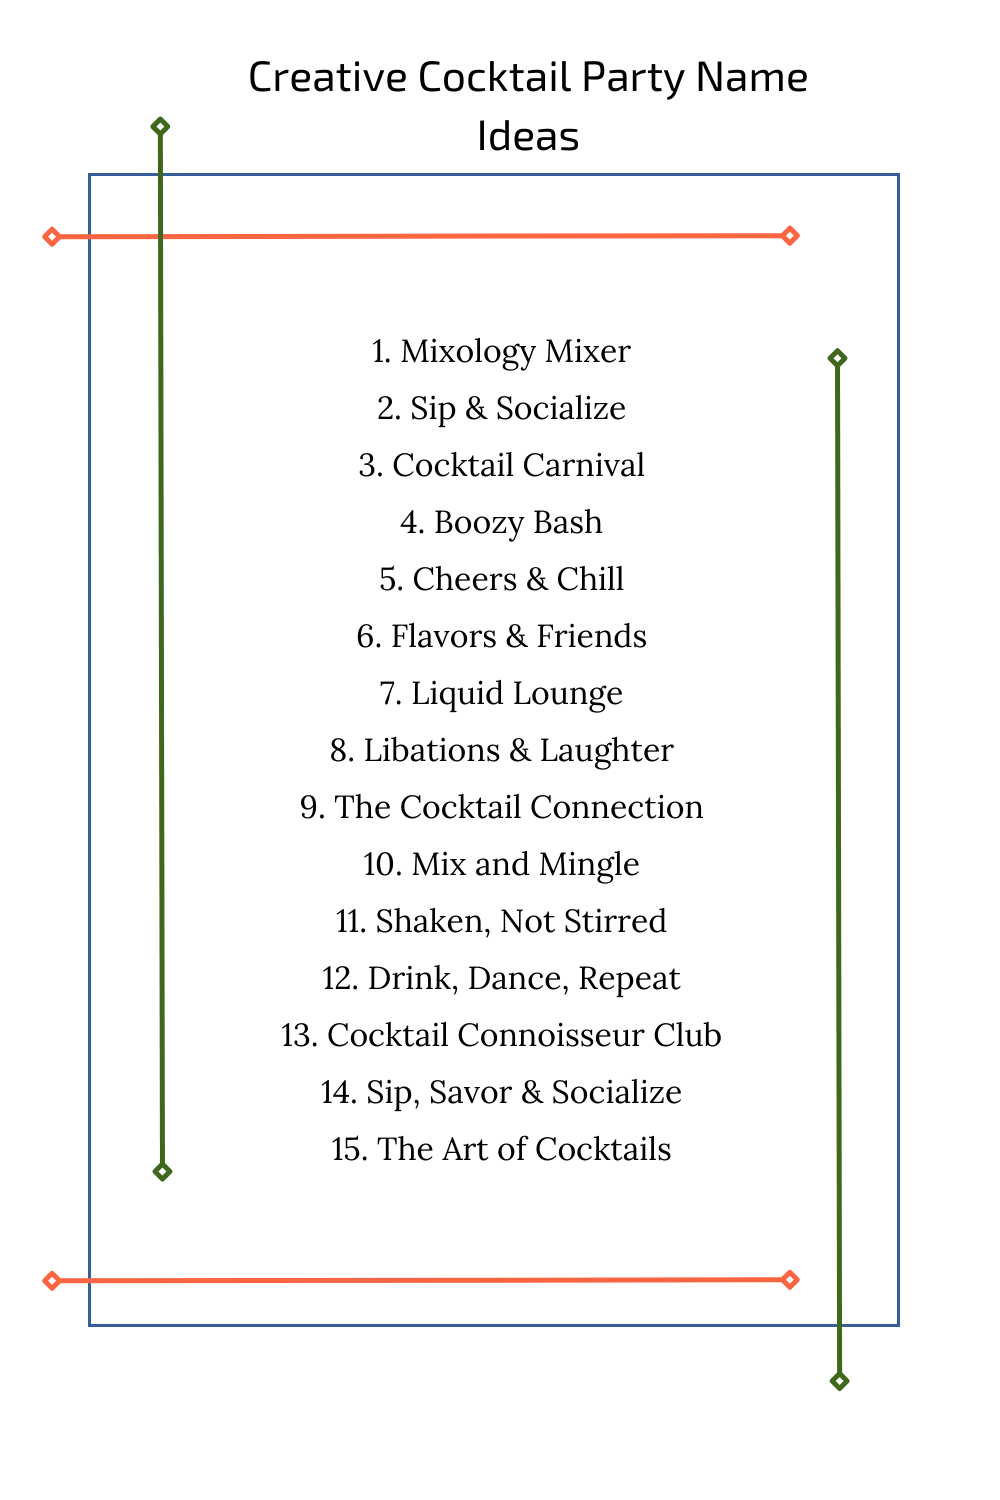 Creative Cocktail Party Name Ideas